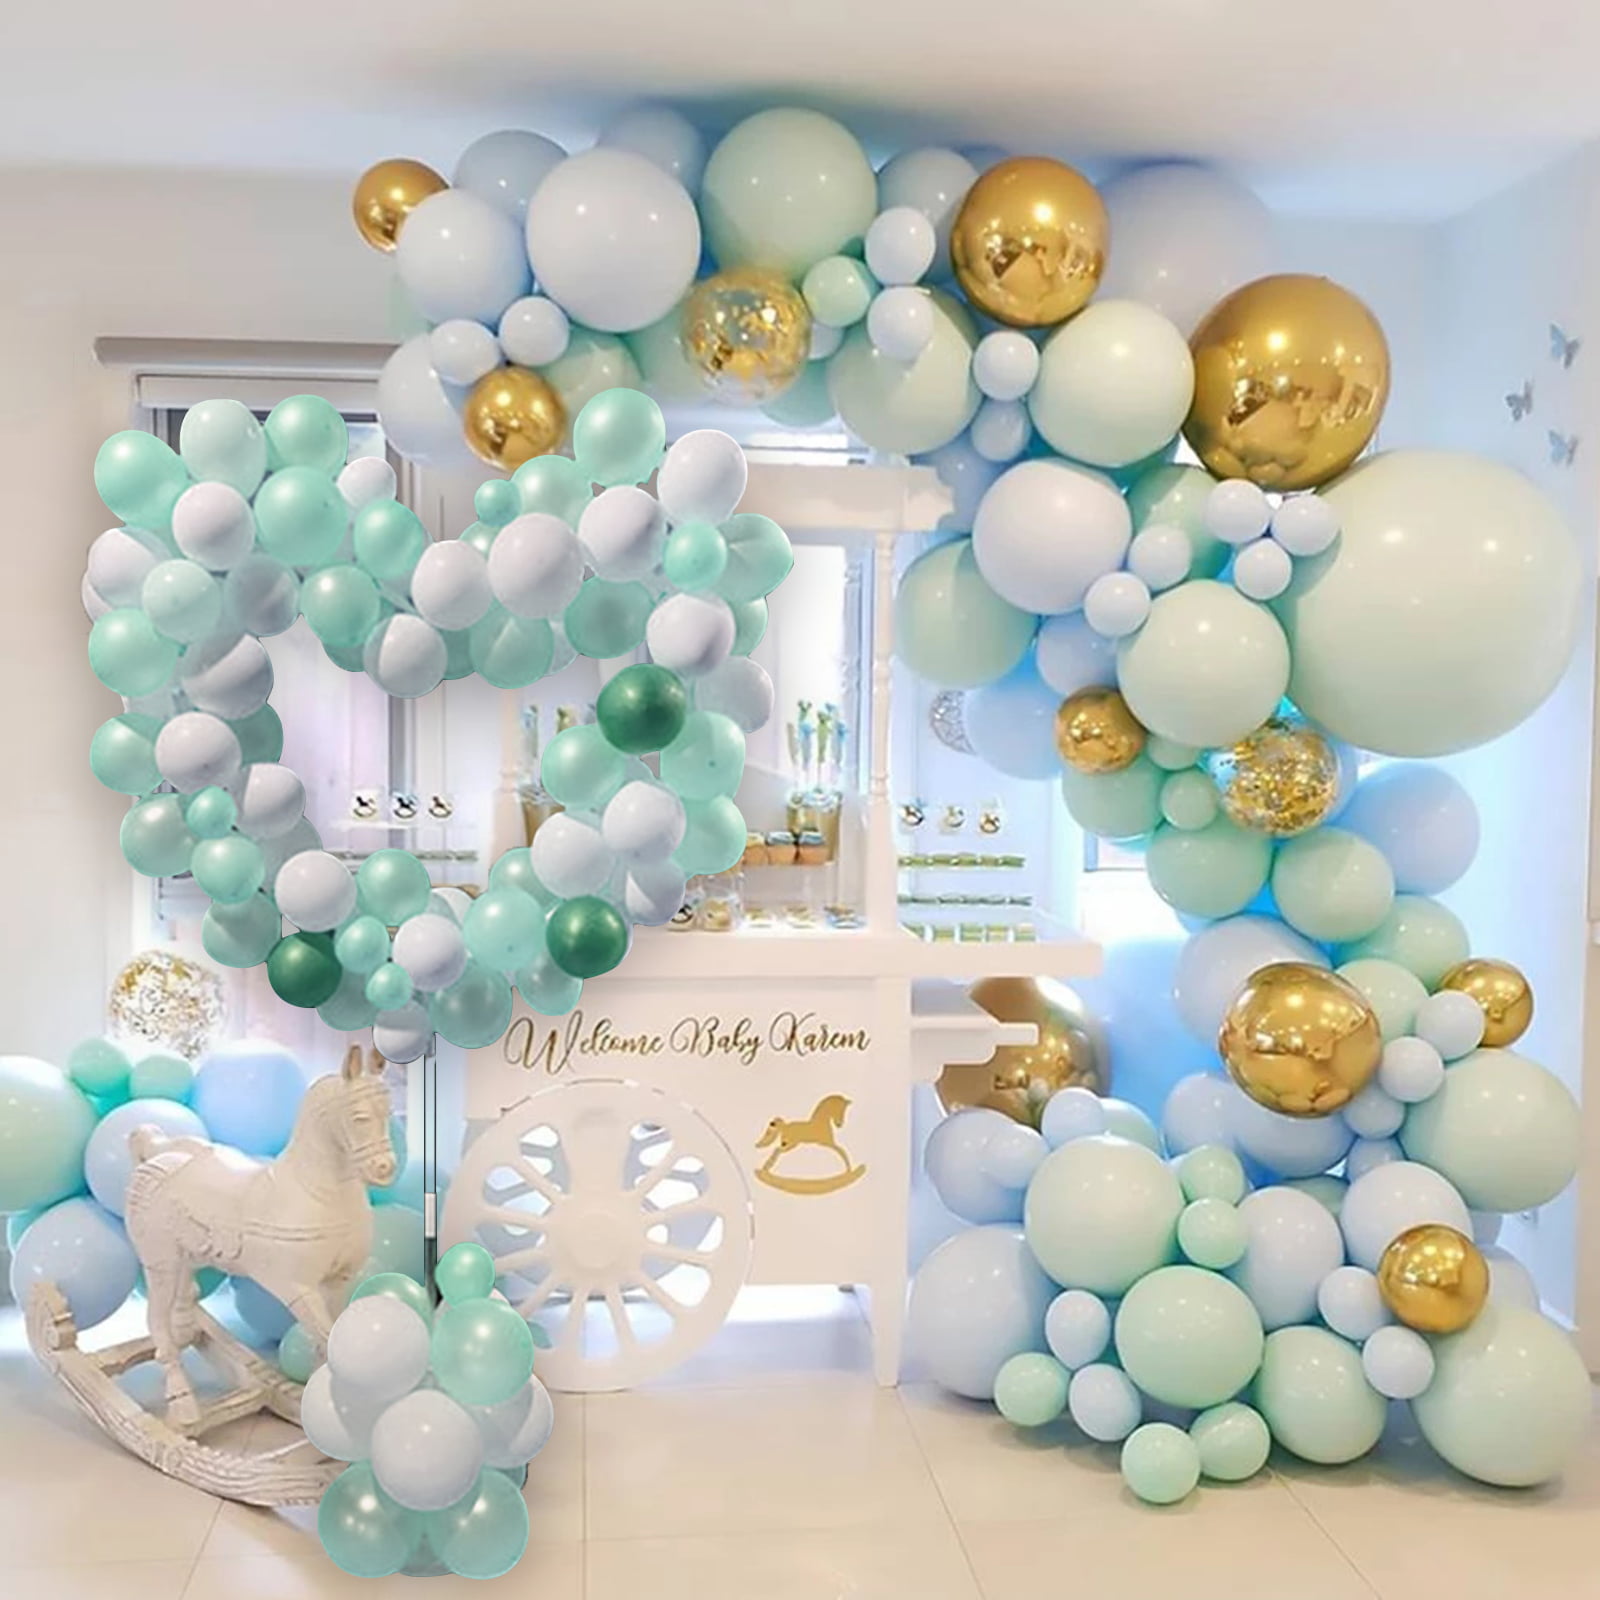 lijie Birthday Balloons,party Balloons.Balloon Ring Arch Net Celebrity  Birthday Decoration Party Scene Decoration Wedding Wedding,grand  Ceremony,party : Amazon.co.uk: Toys & Games